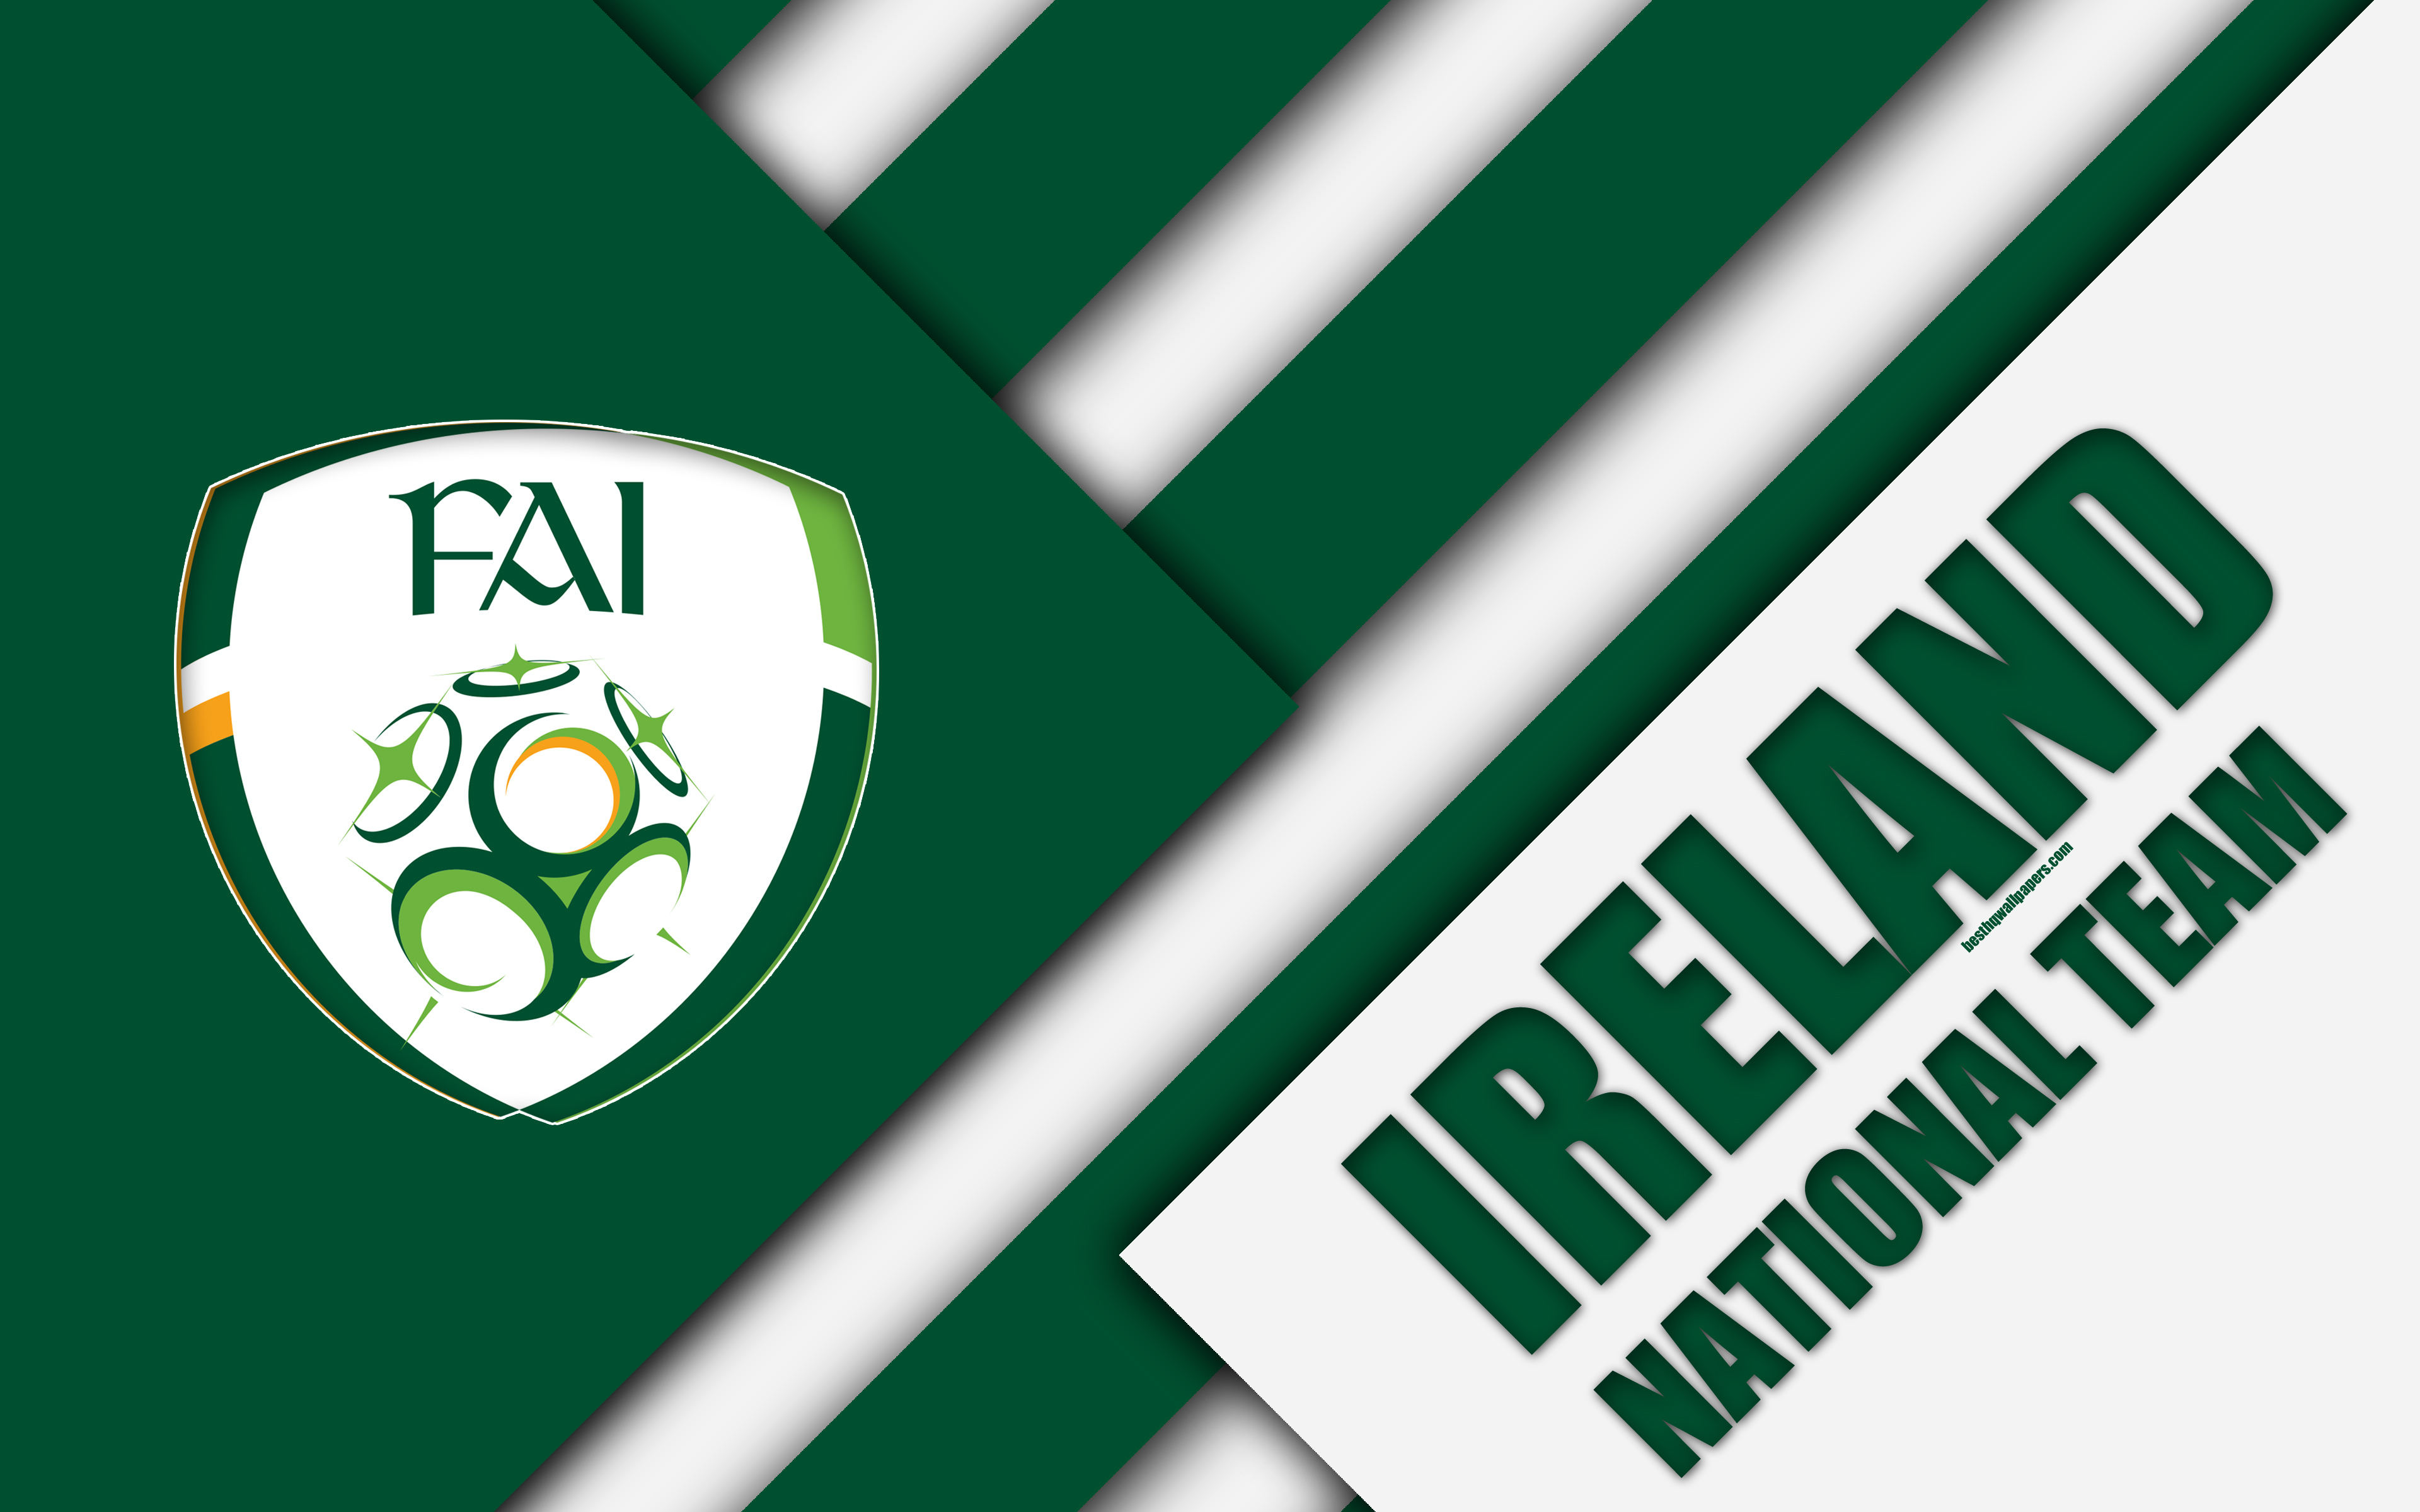 Download wallpaper Ireland national football team, 4k, emblem, material design, white green abstraction, logo, football, Ireland, coat of arms for desktop with resolution 3840x2400. High Quality HD picture wallpaper